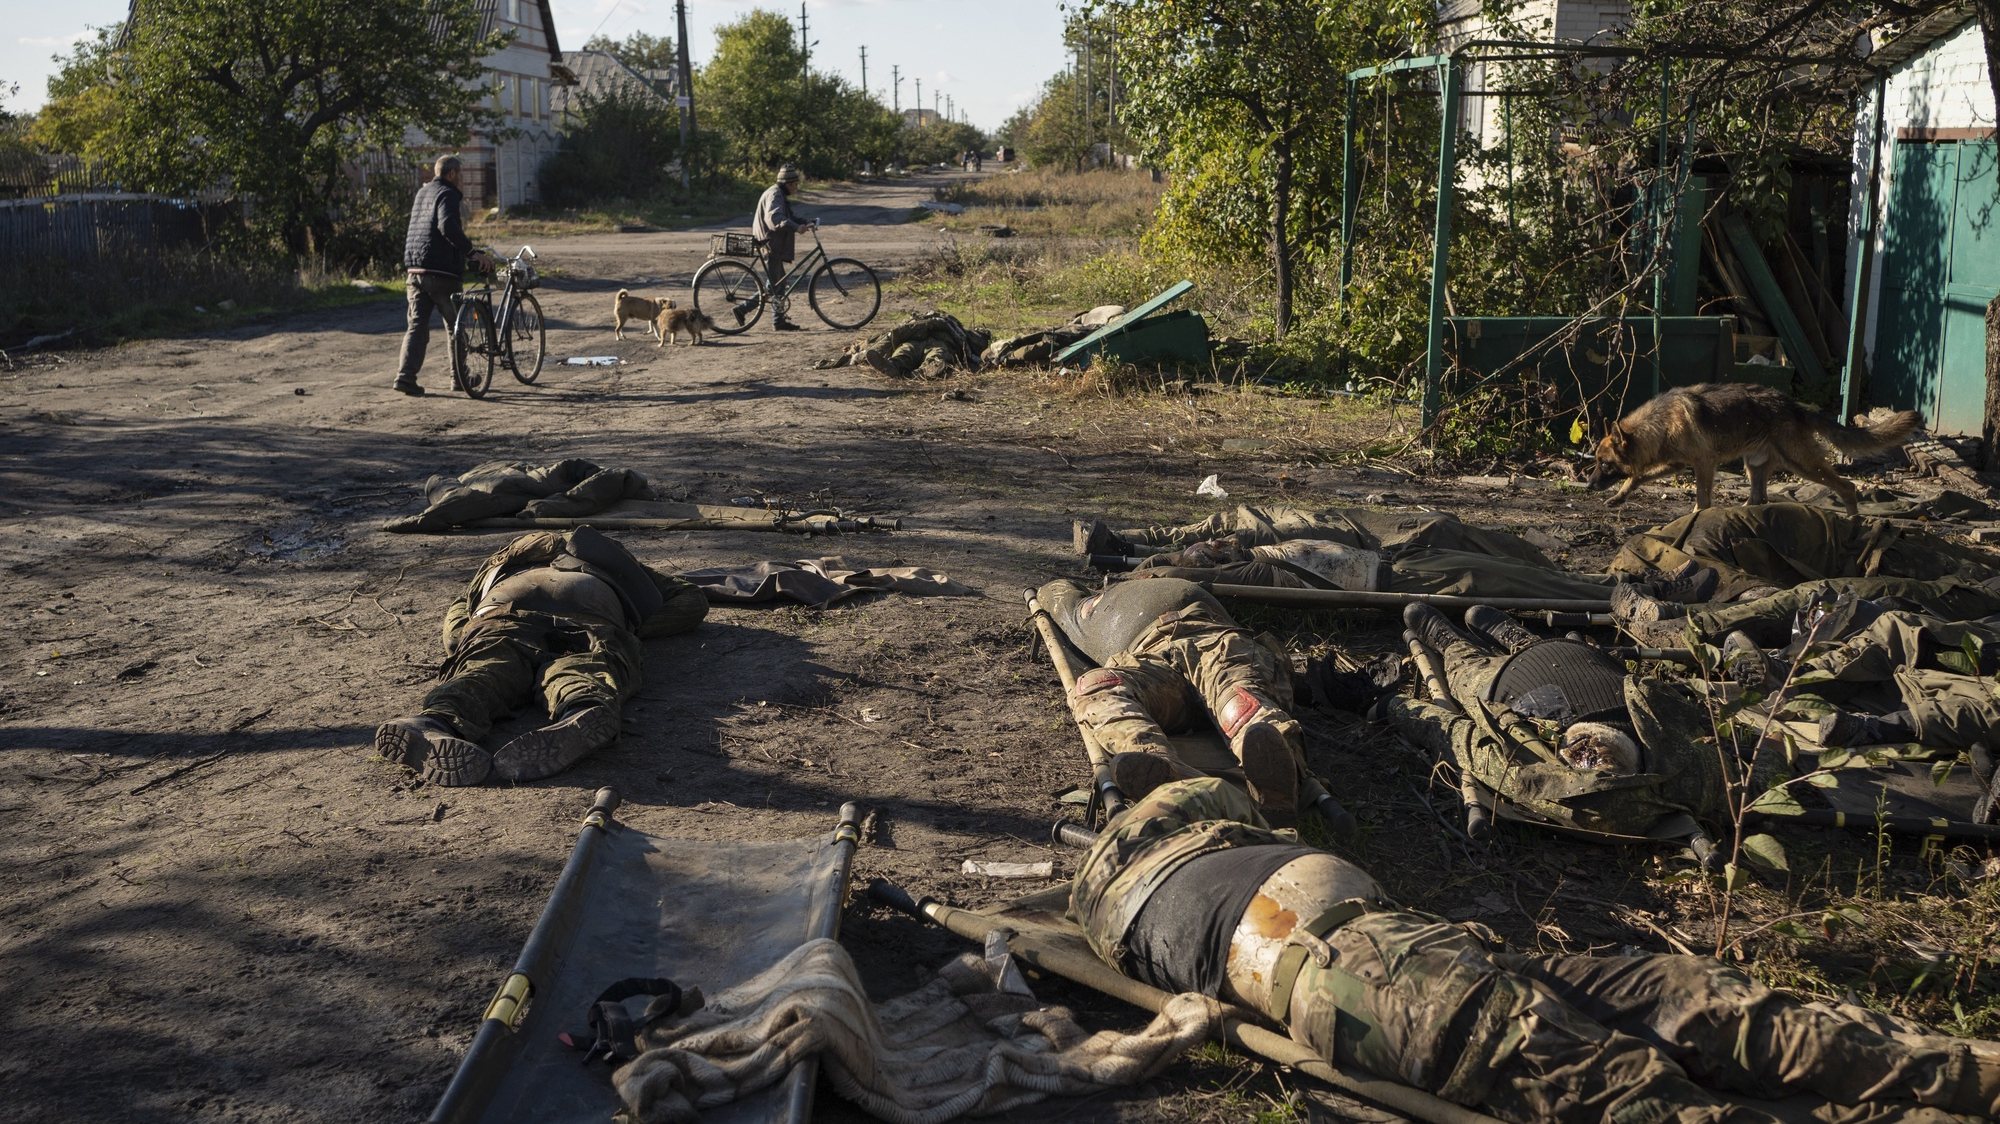 epa10228291 Local residents pass by the dead bodies of Russian soldiers that remain on a street in the recently recaptured city of Lyman in the Luhansk area, Ukraine, 06 October 2022 amid Russia&#039;s military invasion. According to locals who witnessed the recapturing of the area by Ukrainian troops, the bodies were being prepared for evacuation but were left when Russian troops were pushed out of Lyman. The Ukrainian army pushed Russian troops from occupied territory in the northeast of the country in a counterattack. Russian troops entered Ukraine on 24 February 2022 starting a conflict that has provoked destruction and a humanitarian crisis.  EPA/ANASTASIA VLASOVA ATTENTION: GRAPHIC CONTENT